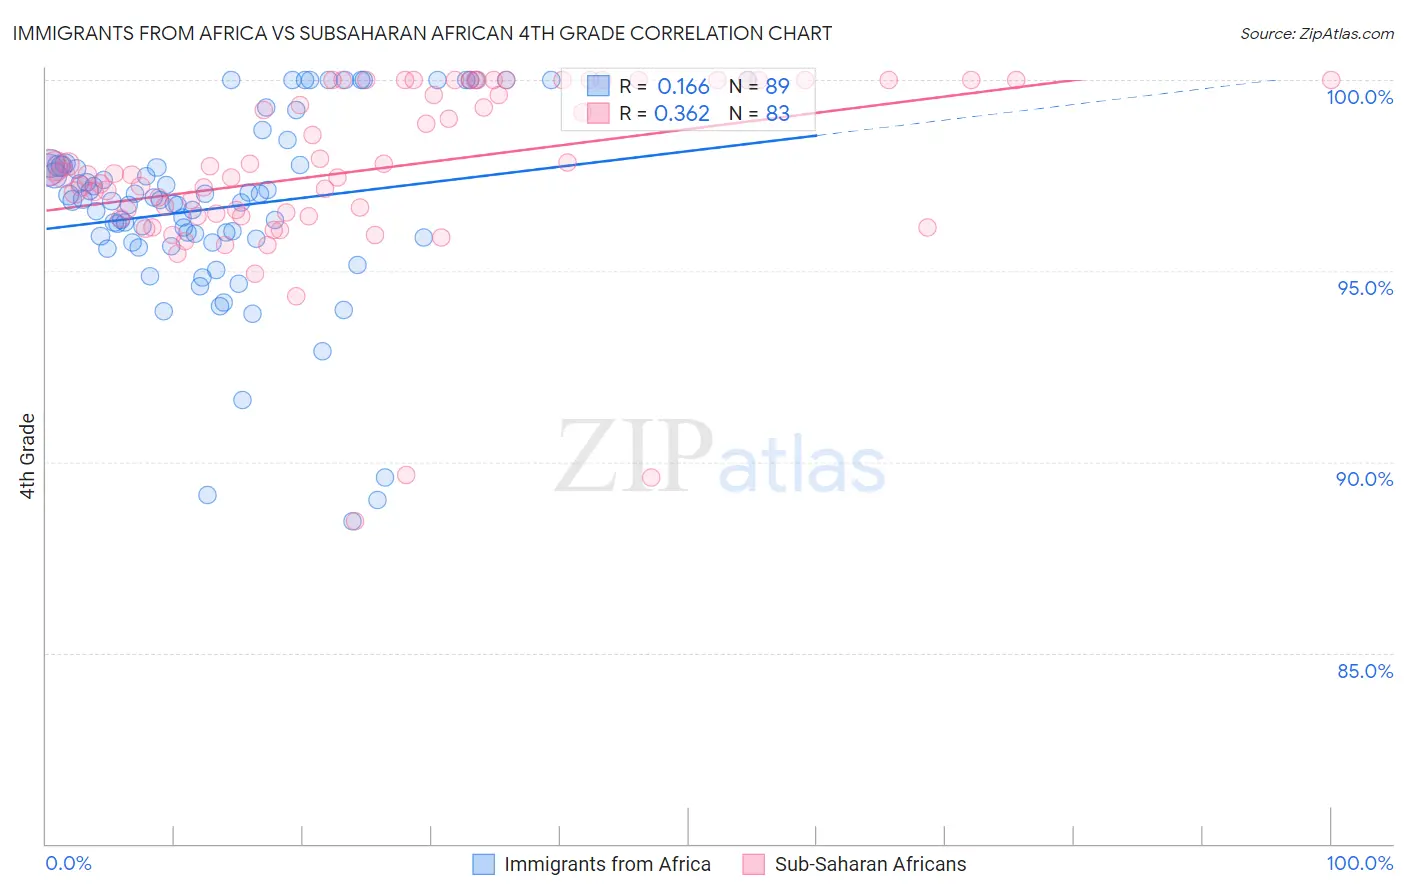 Immigrants from Africa vs Subsaharan African 4th Grade